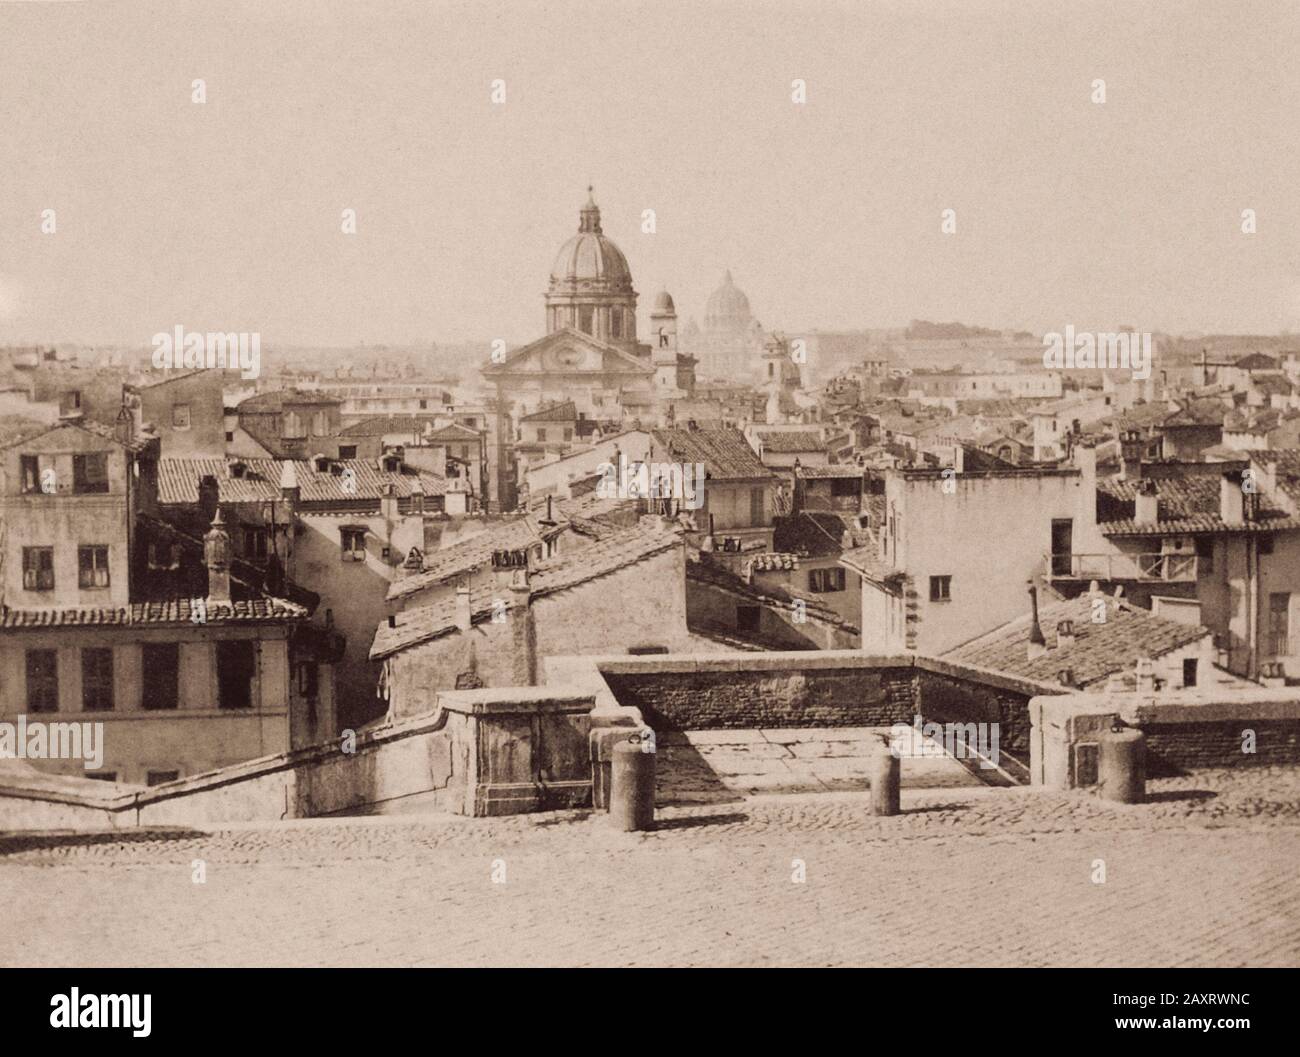 Panoramic view of Rome. From album 'Photographic views of the main monuments of Rome', 1860s Stock Photo